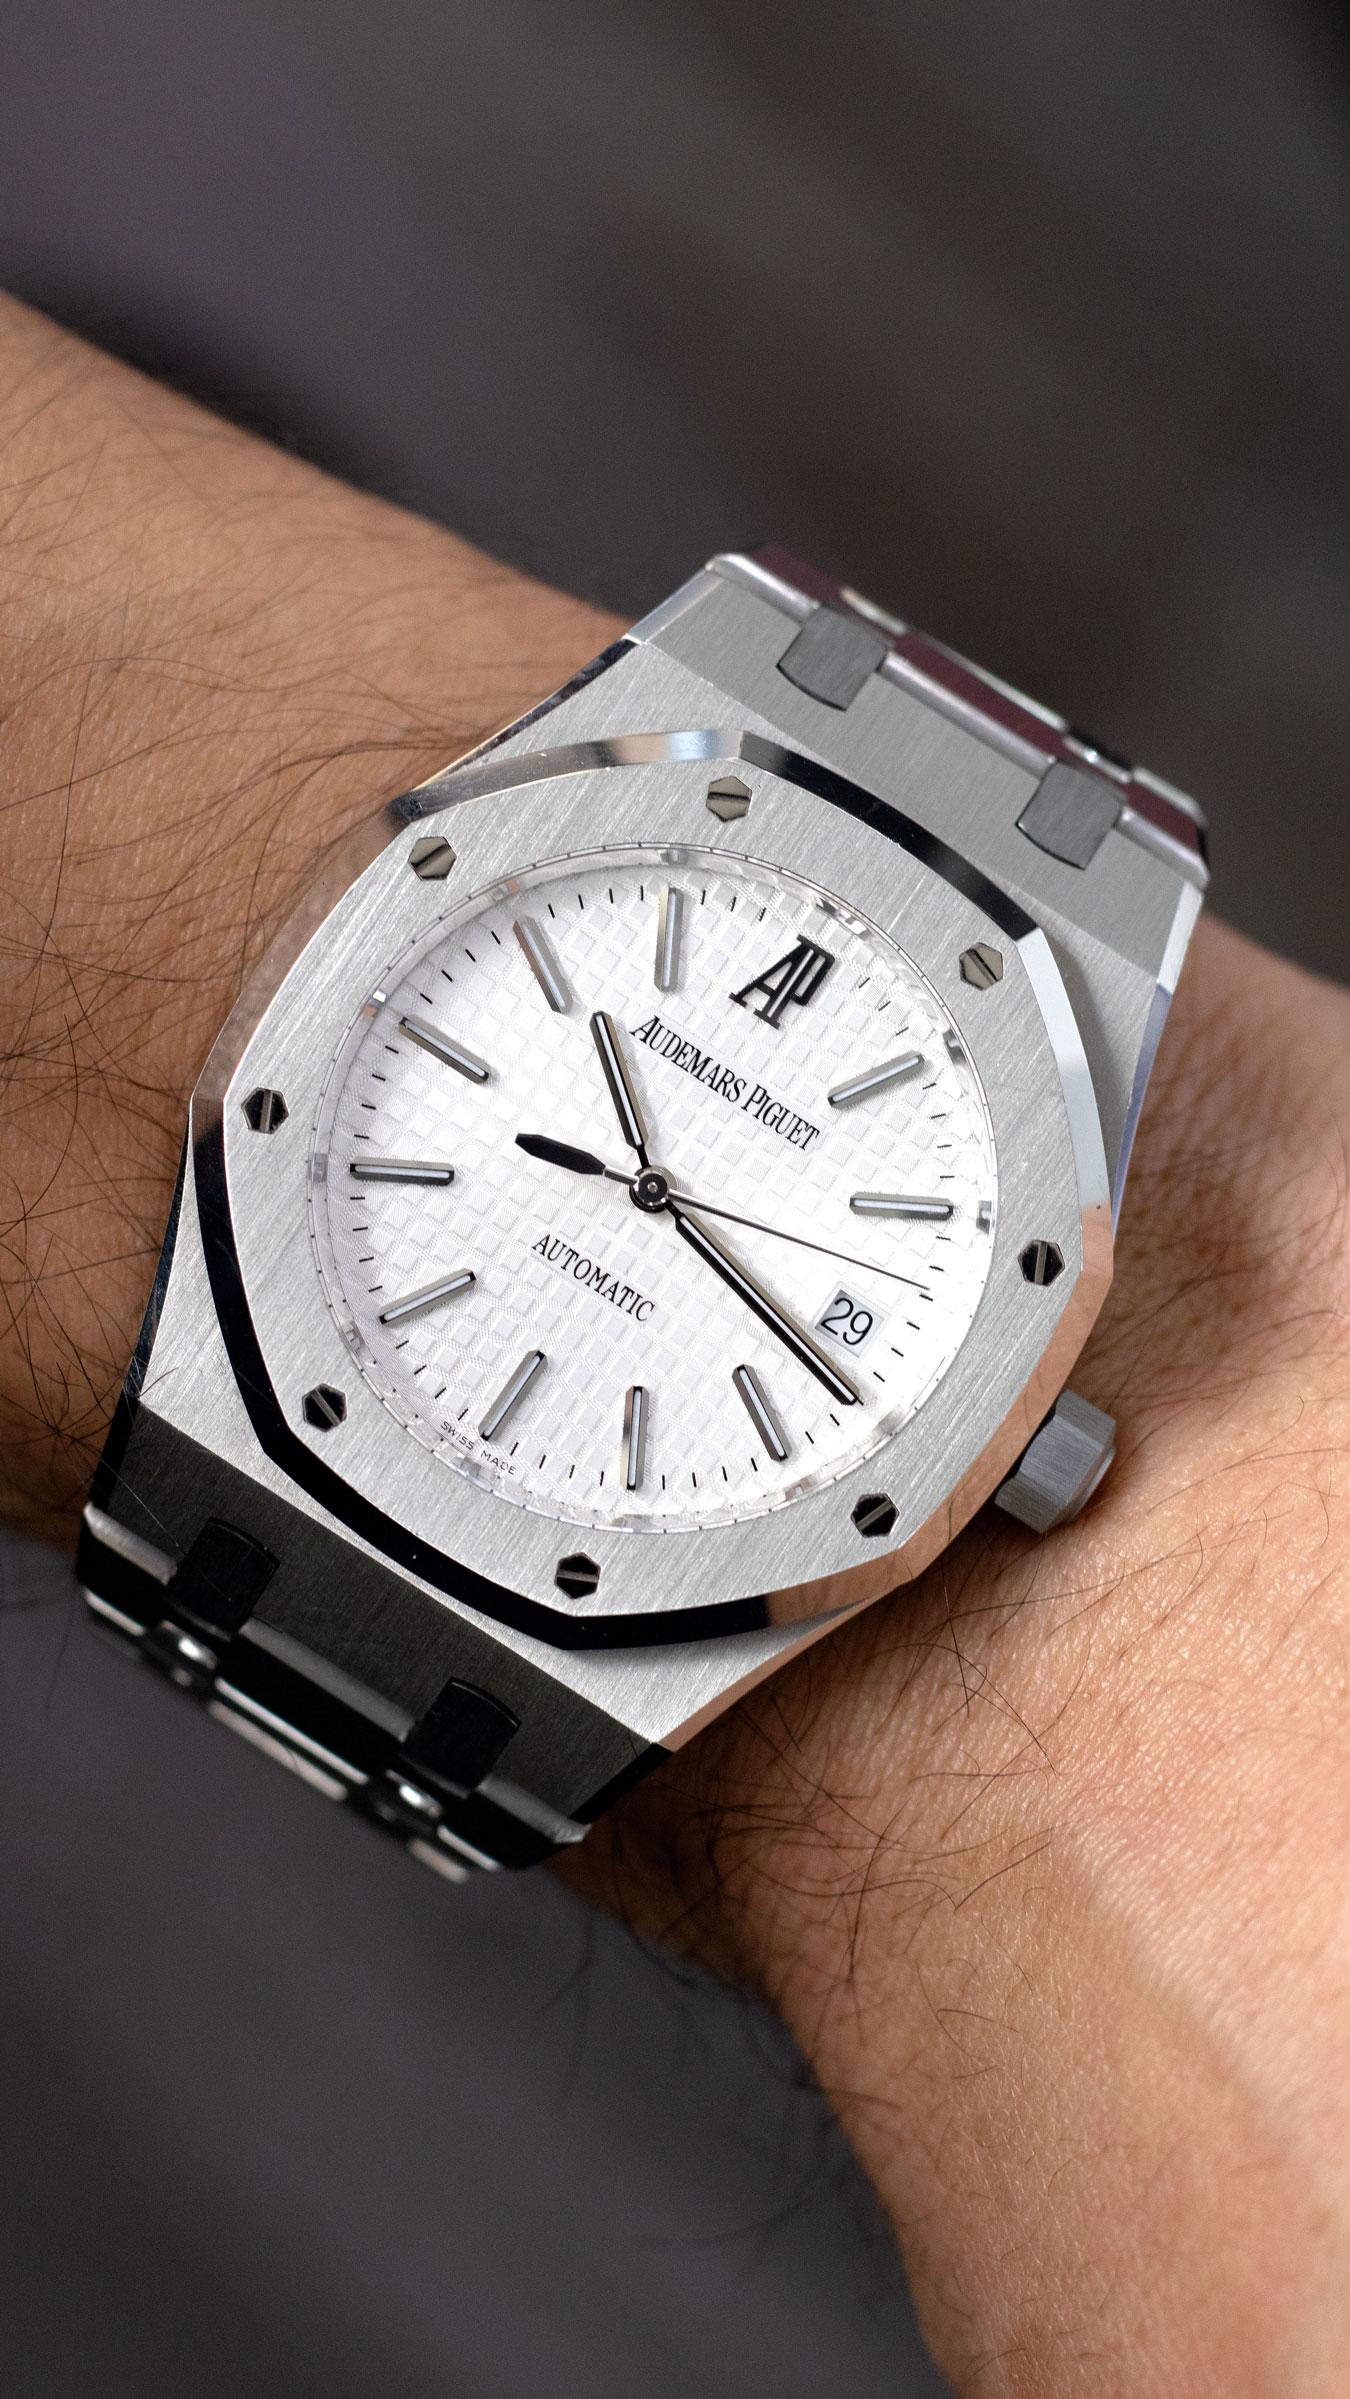 Audemars Piguet 15300 Royal Oak White Dial Watch

Brand: Audemars Piguet

Model: 15300

Dial: White dial

Case: Stainless steel

Bracelet: stainless steel link bracelet

Movement: Automatic

Bezel: Stainless Steel

Includes: Watch with box and